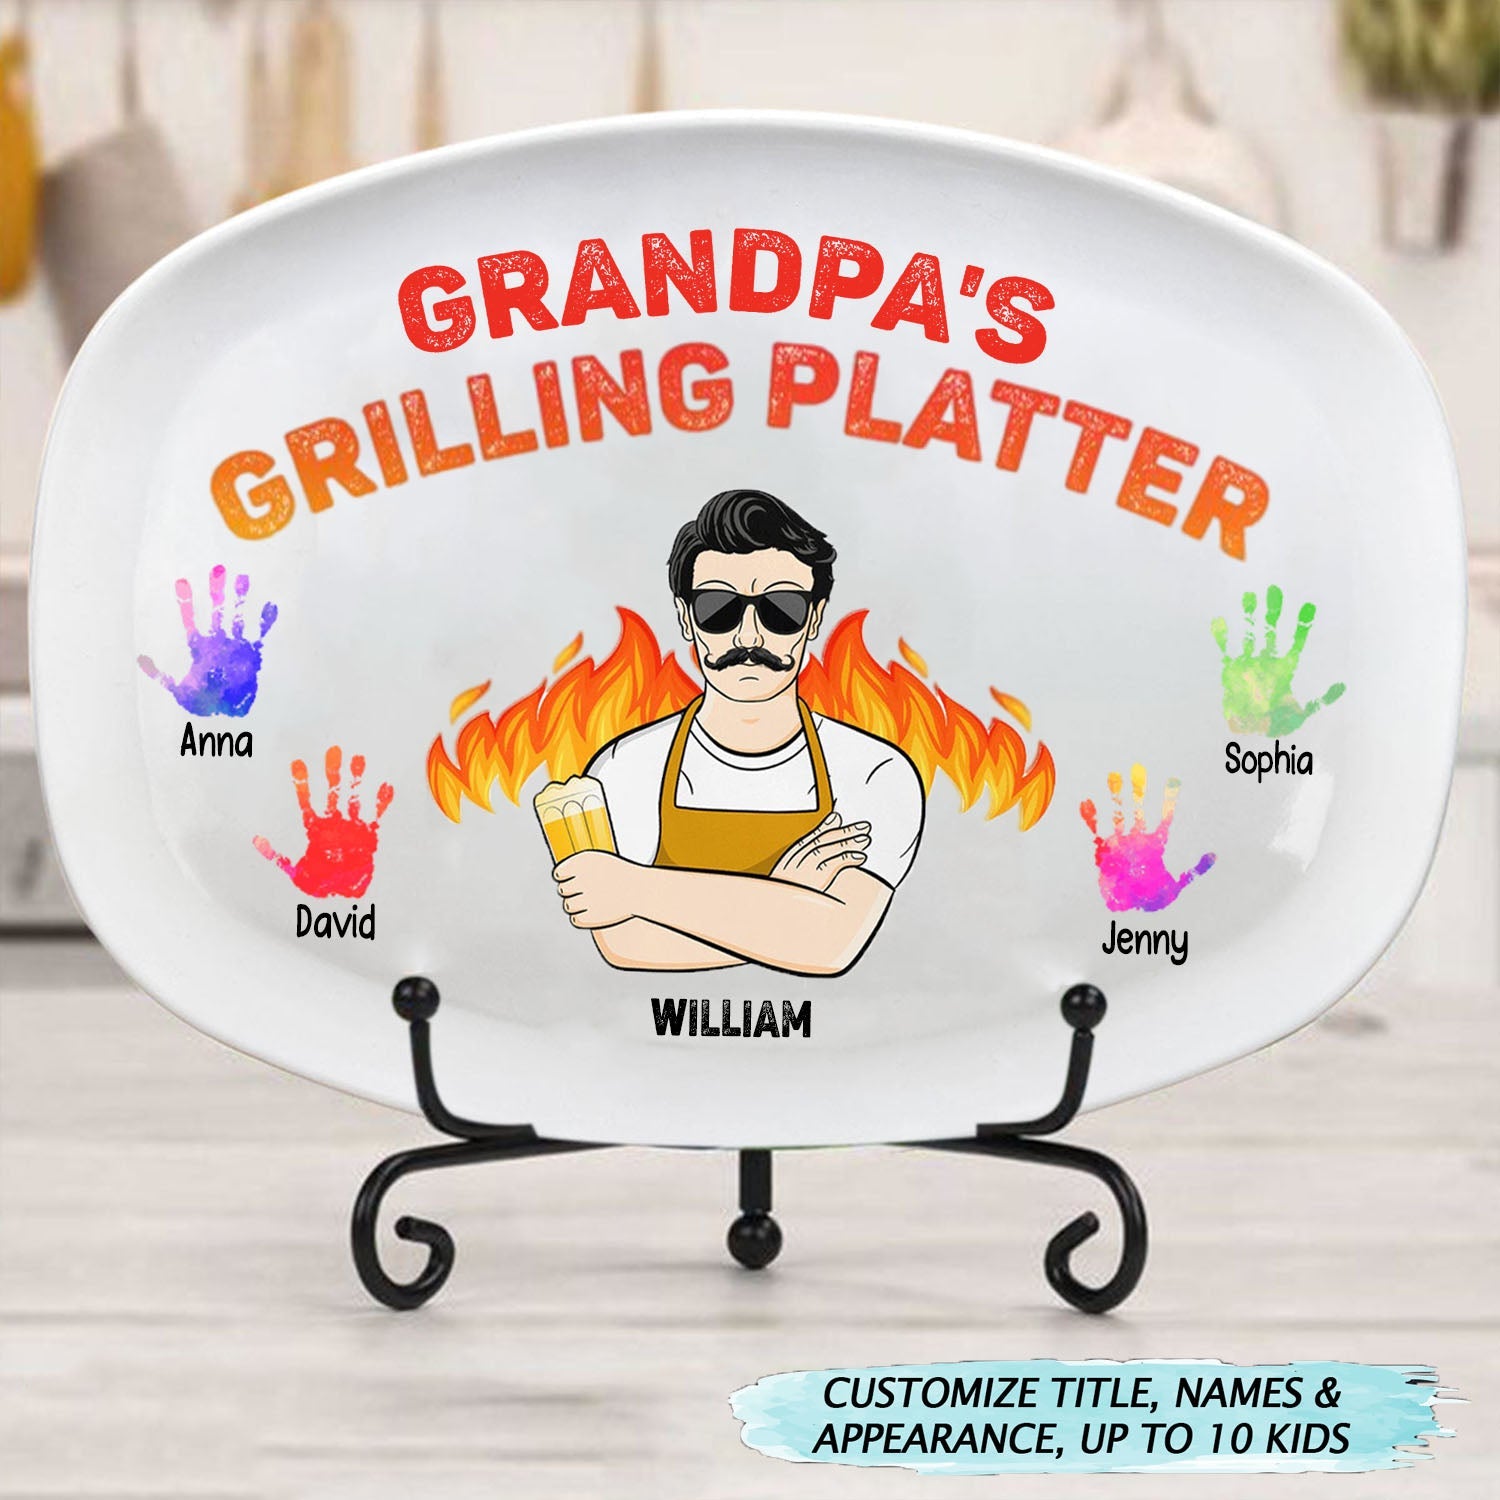 Daddy's Grilling Platter - Gift For Dad, Father, Grandfather, Grandpa - Personalized Plate